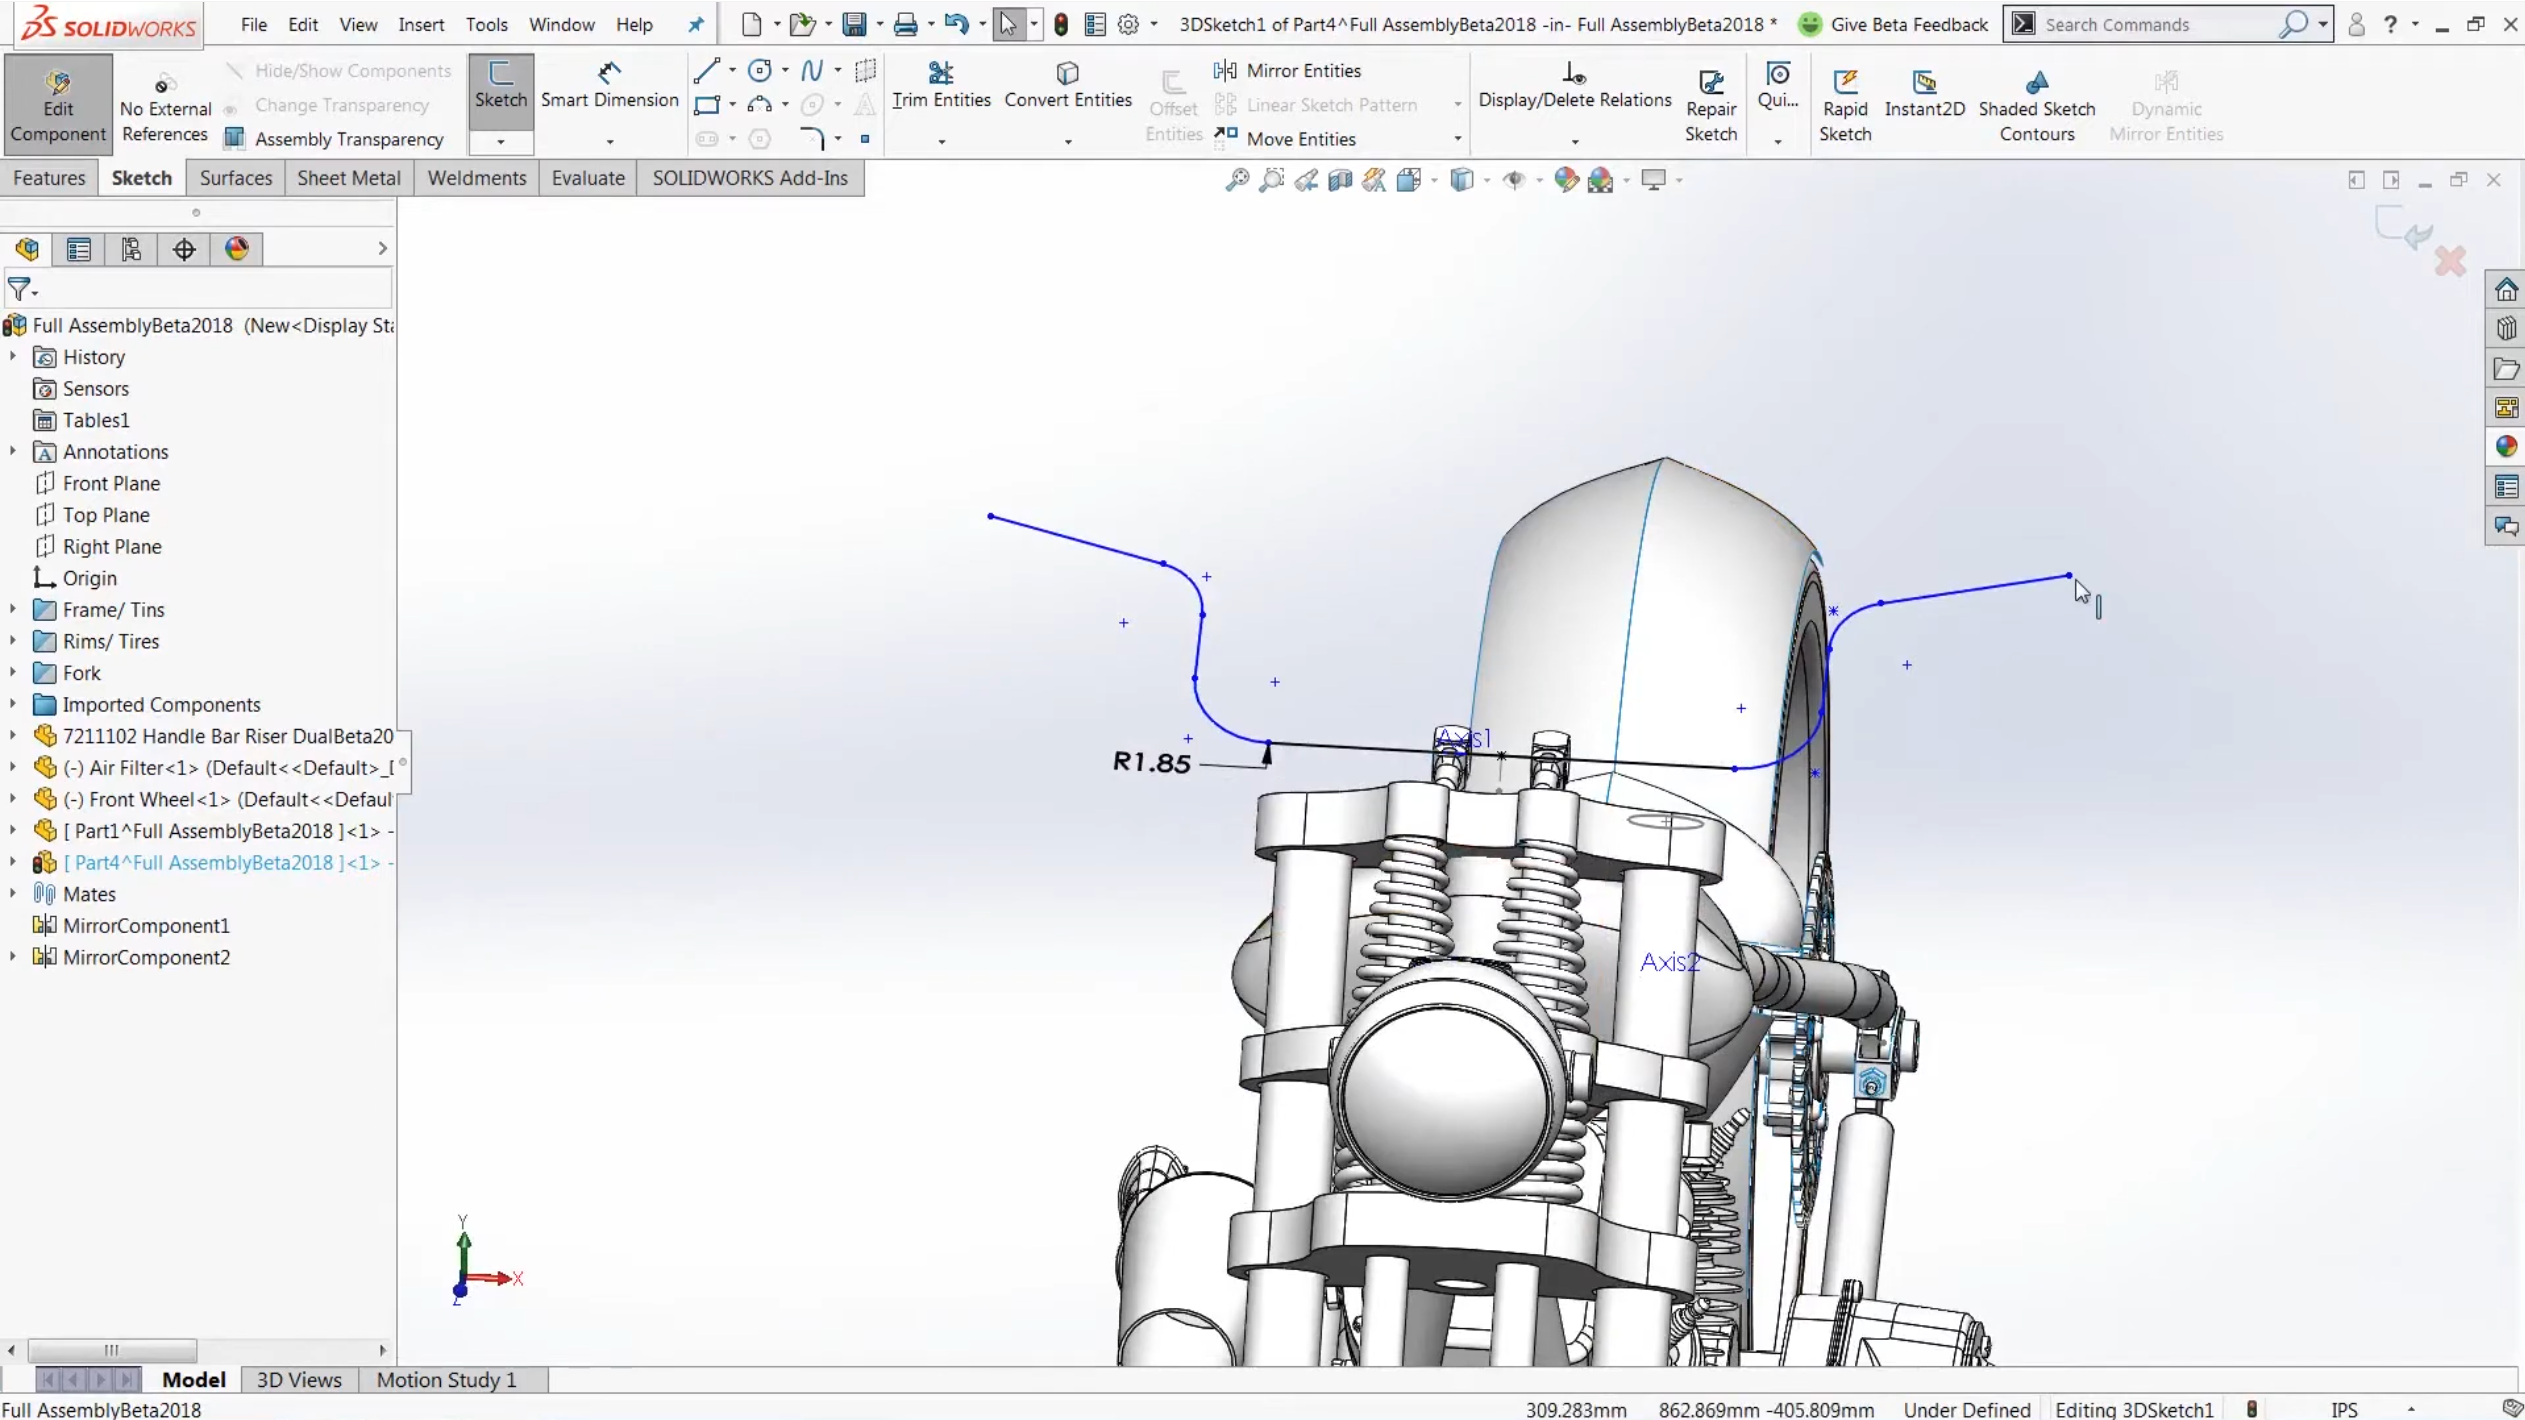 Mirror 3D sketches in SOLIDWORKS